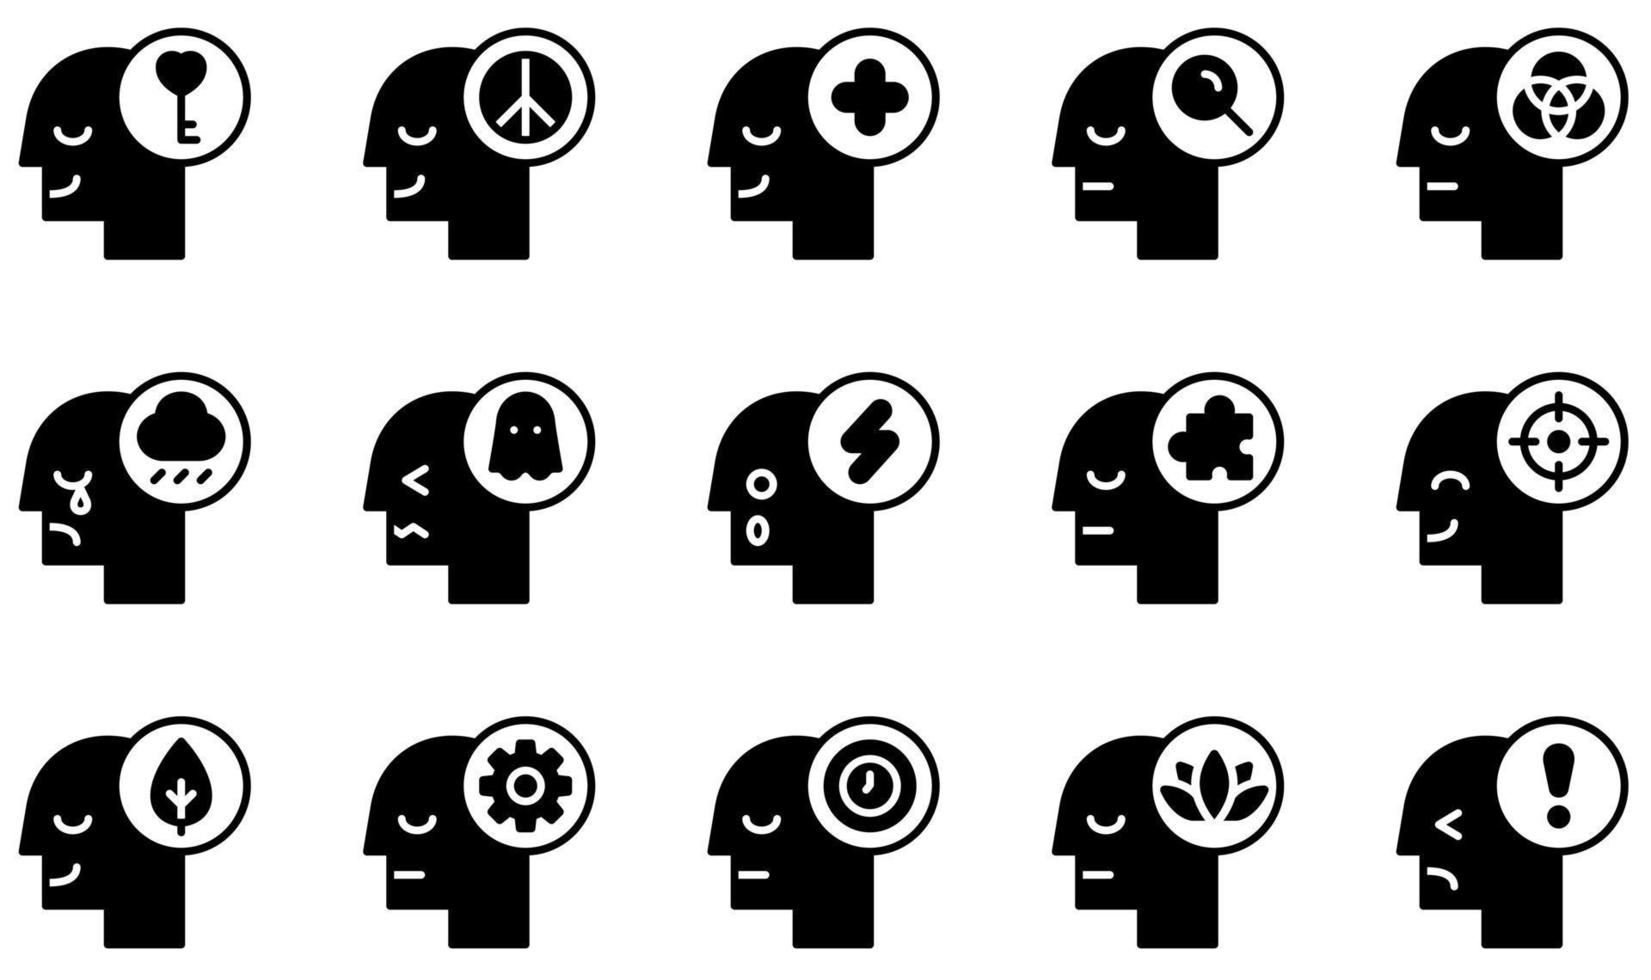 Set of Vector Icons Related to Human Mind. Contains such Icons as Open Mind, Positive, Sadness, Scared, Shocked, Time and more.